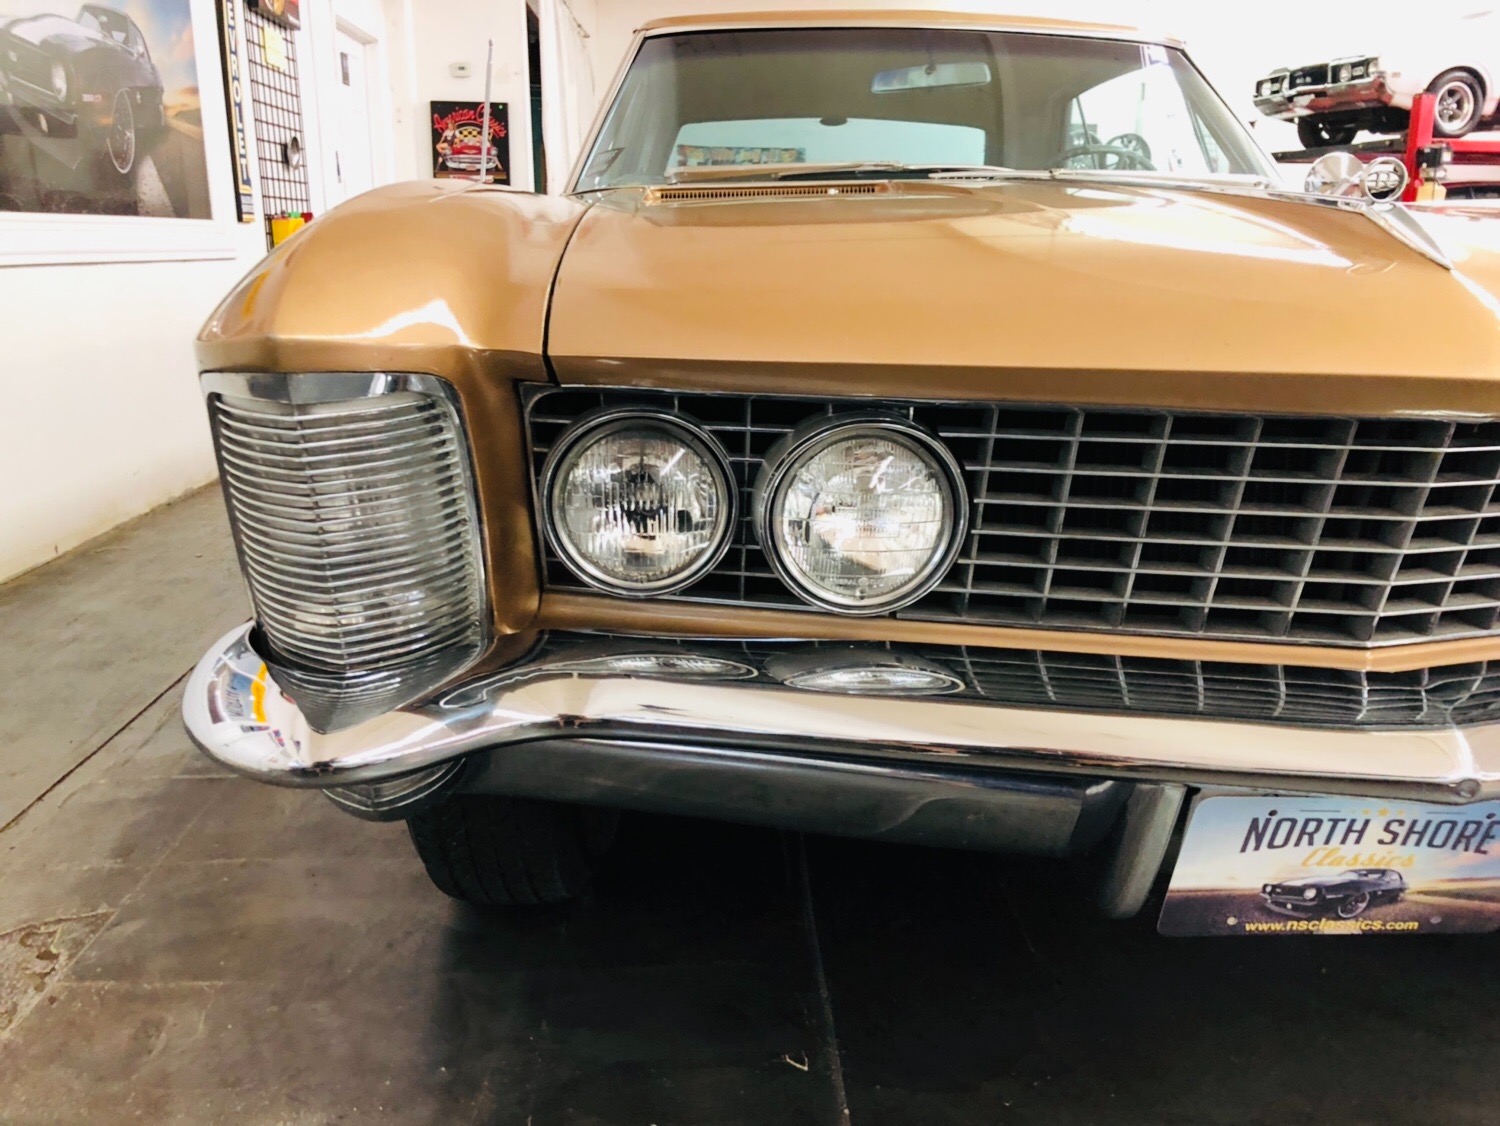 Used 1964 BUICK Riviera -Classic Beauty-SEE VIDEO- | Mundelein, IL